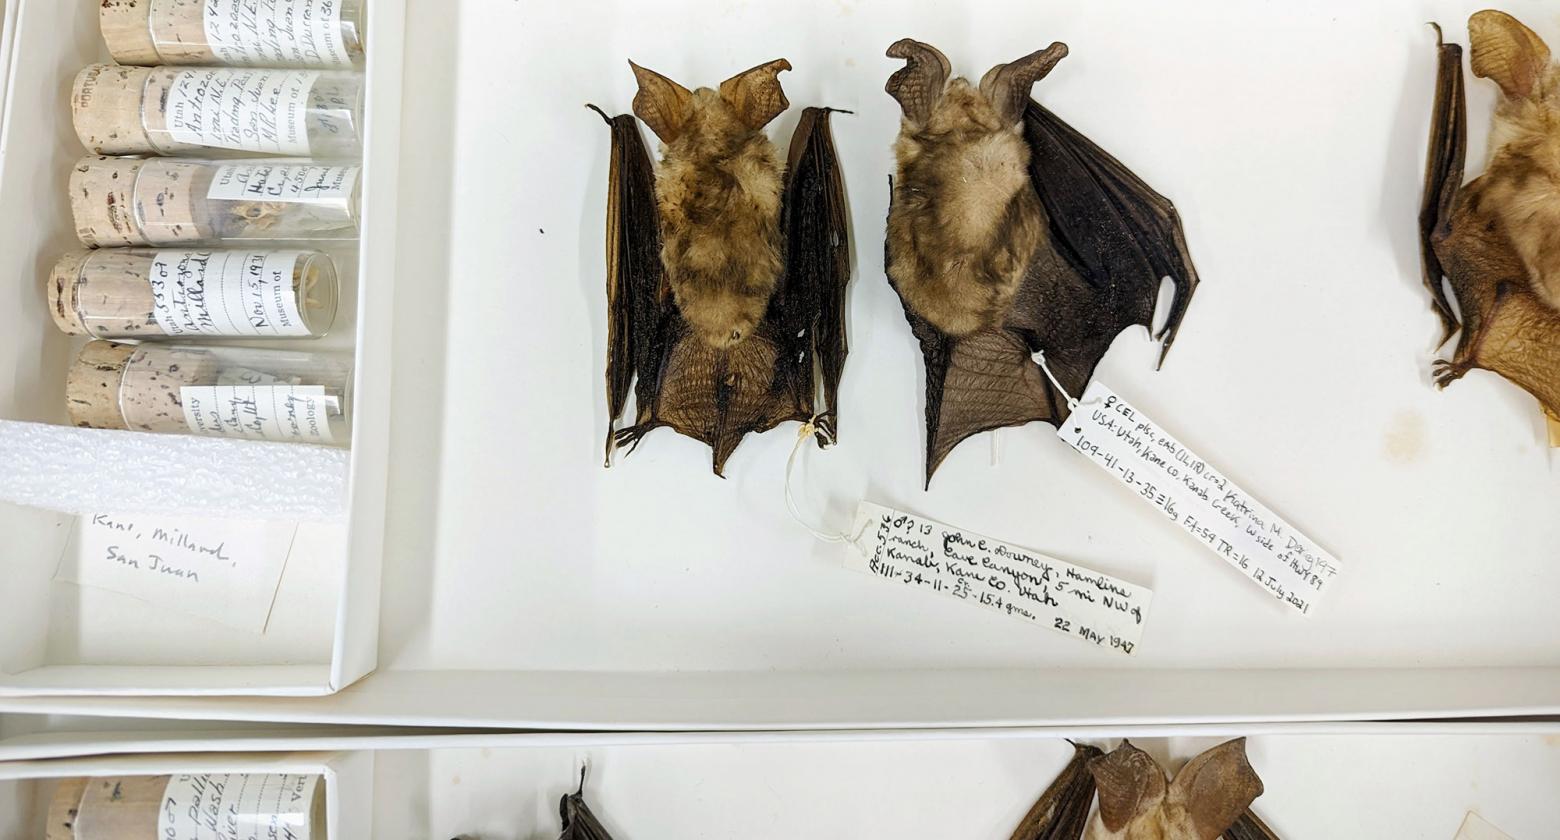 [image] Studying the Past, Present, and Future of Bats